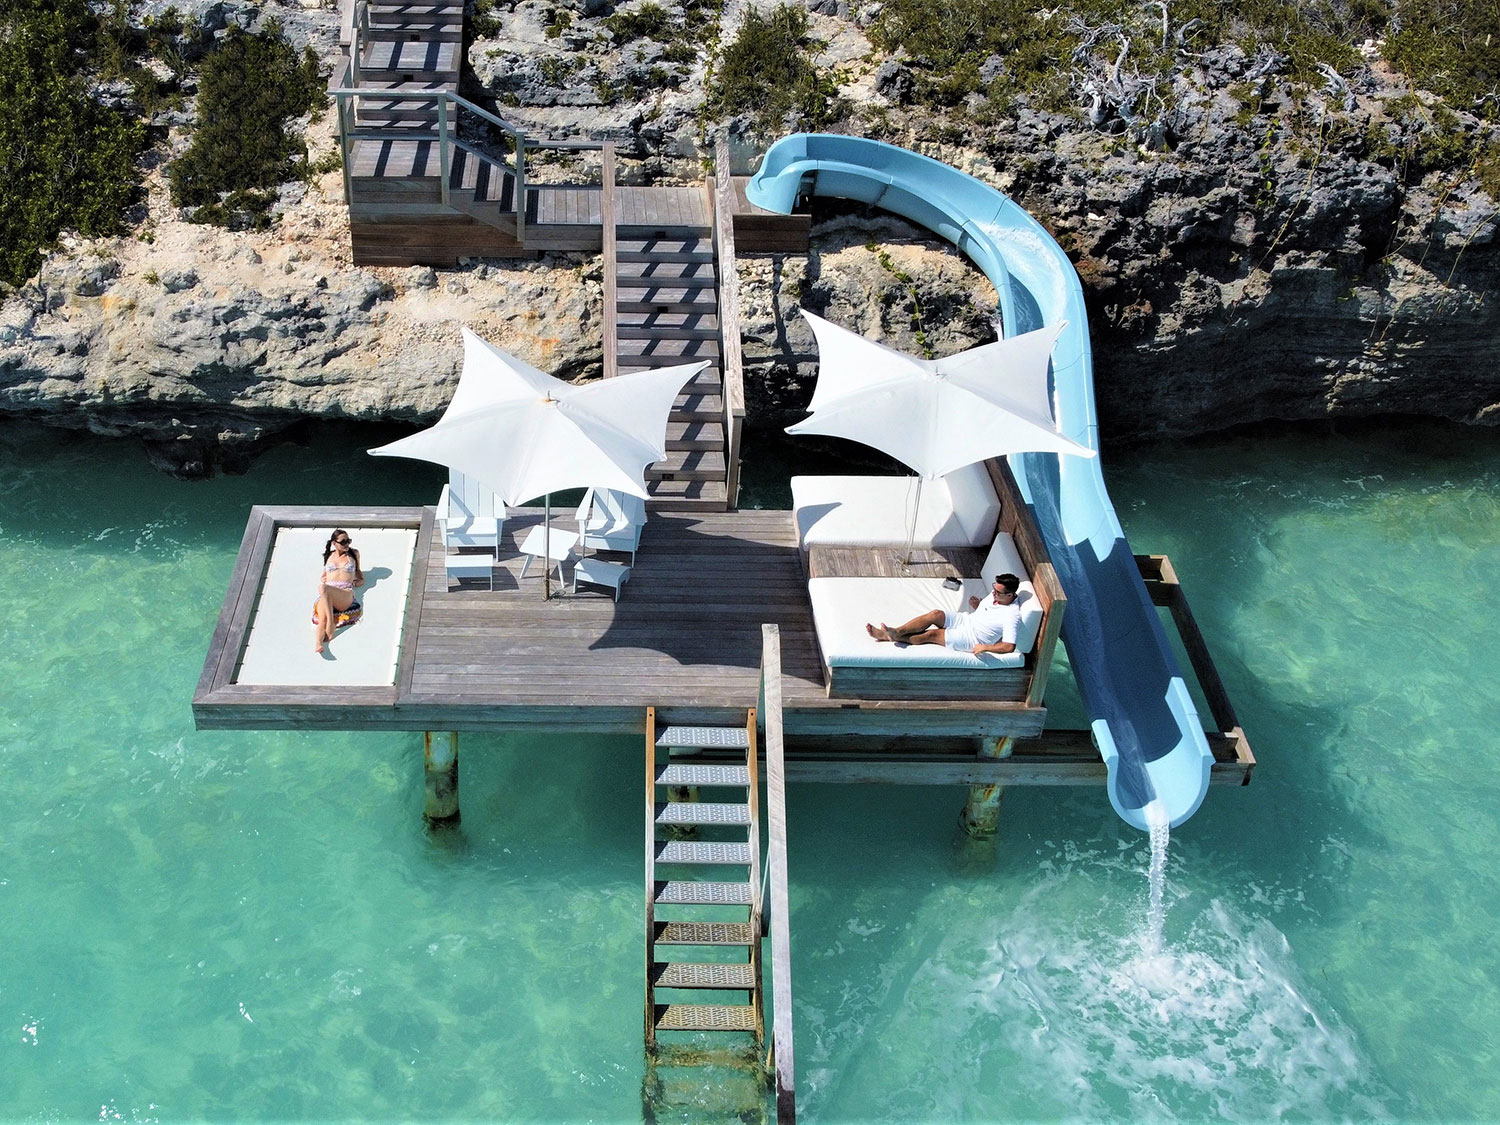 The deck and waterslide of the Amuse Villa at Wymara Resort and Villas in Turks and Caicos.